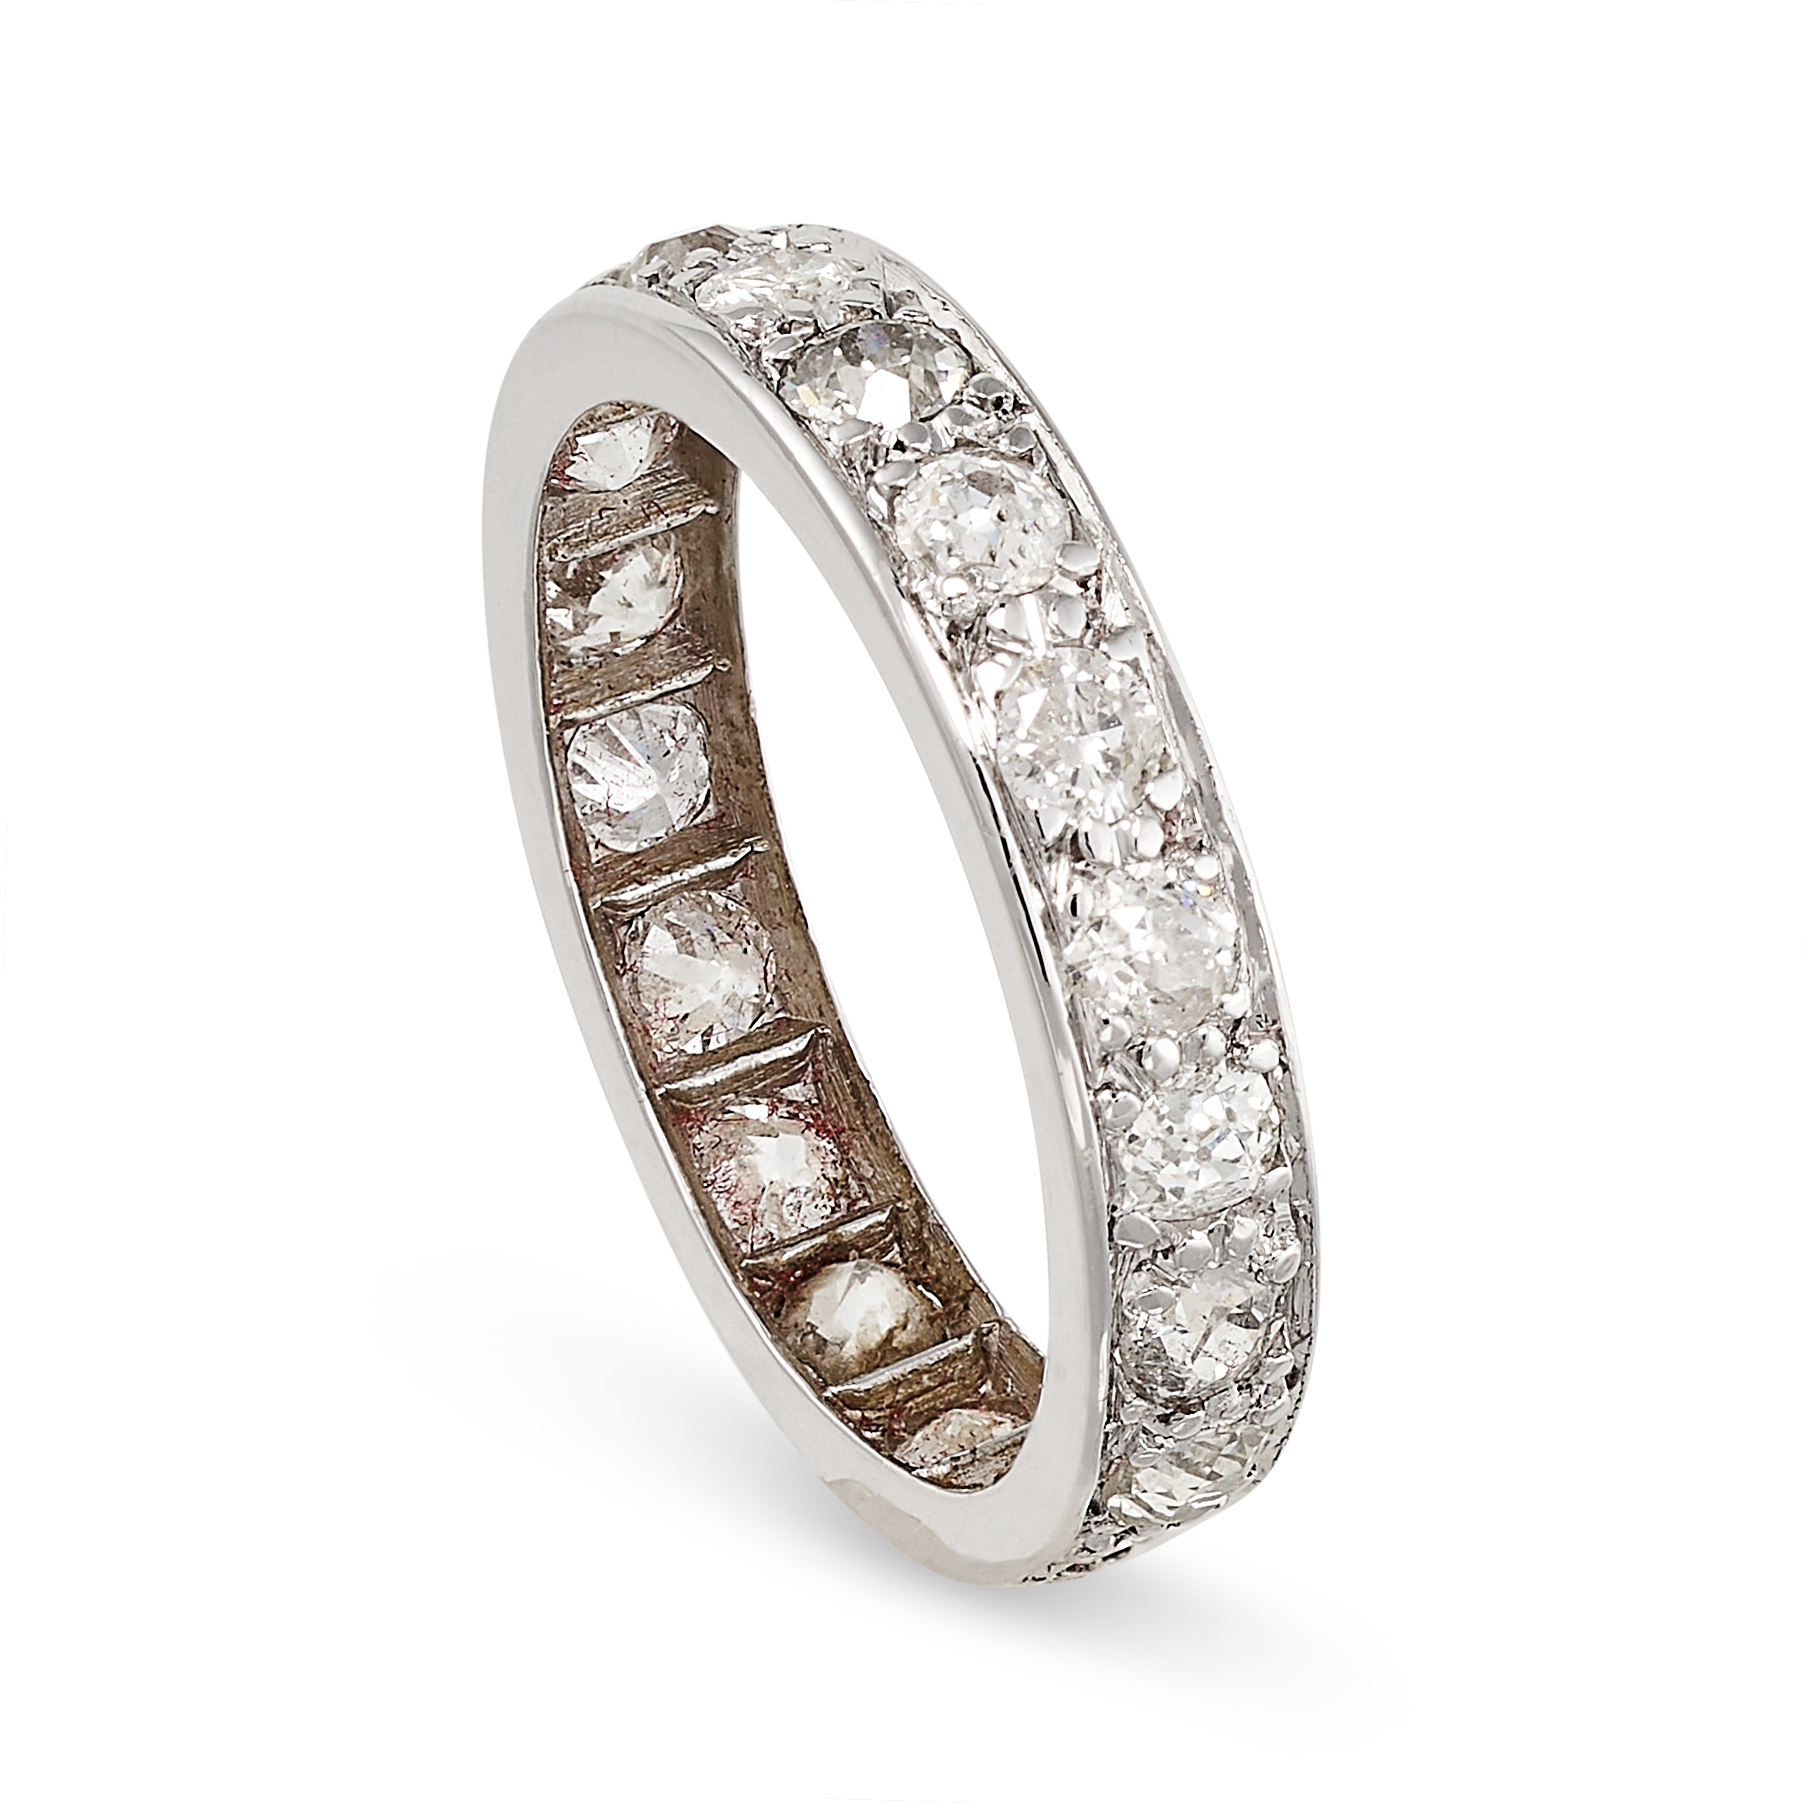 NO RESERVE - A DIAMOND FULL ETERNITY RING the band set all around with a row of old cut diamonds - Image 2 of 2